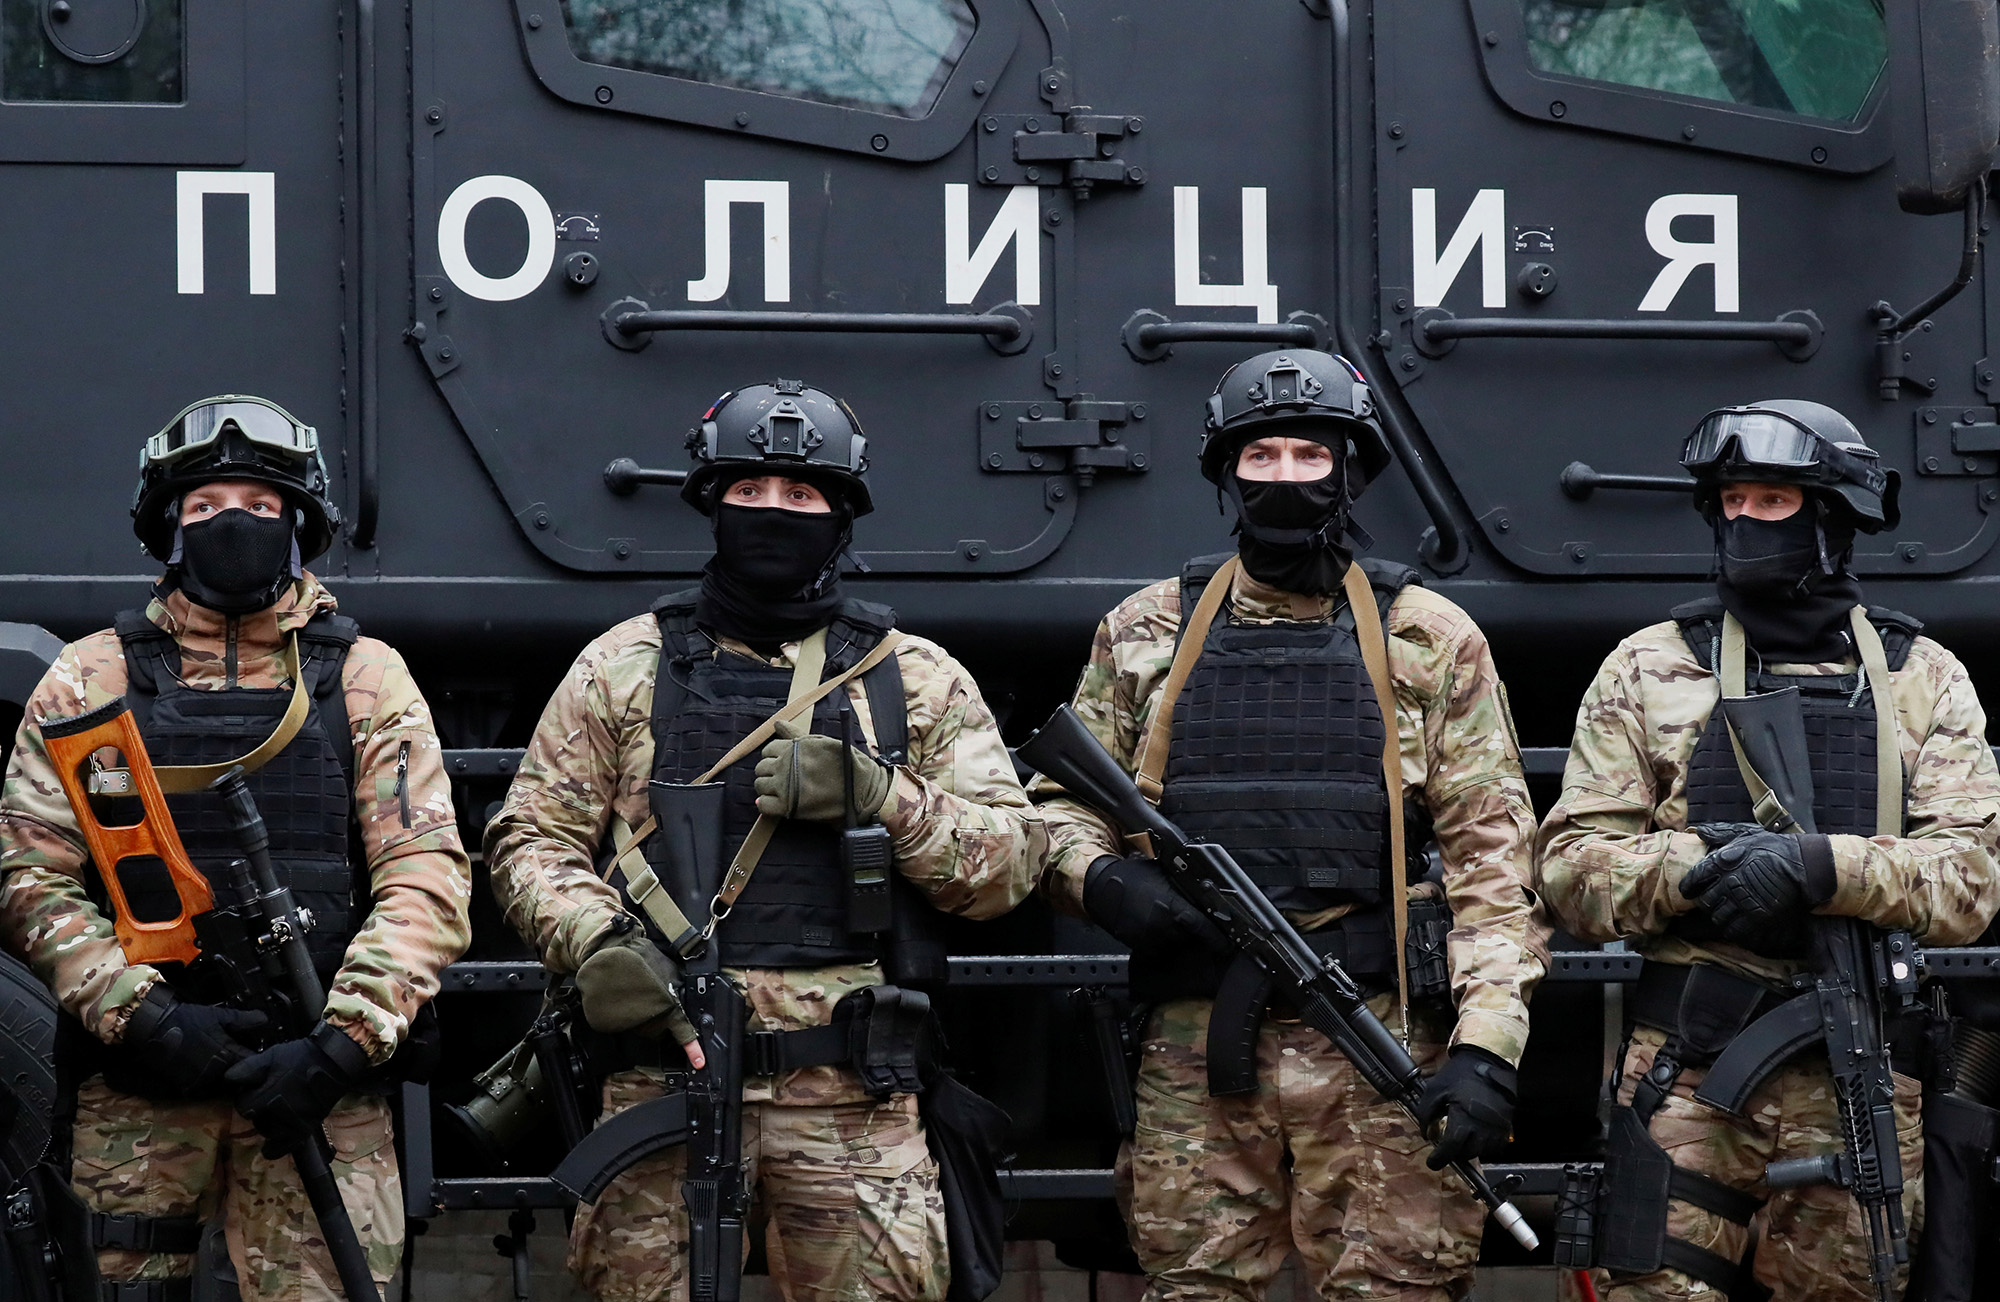 Members of the Grom special forces unit under Russia's Interior Ministry take part in a drill near Moscow, Russia, on November 29, 2019.